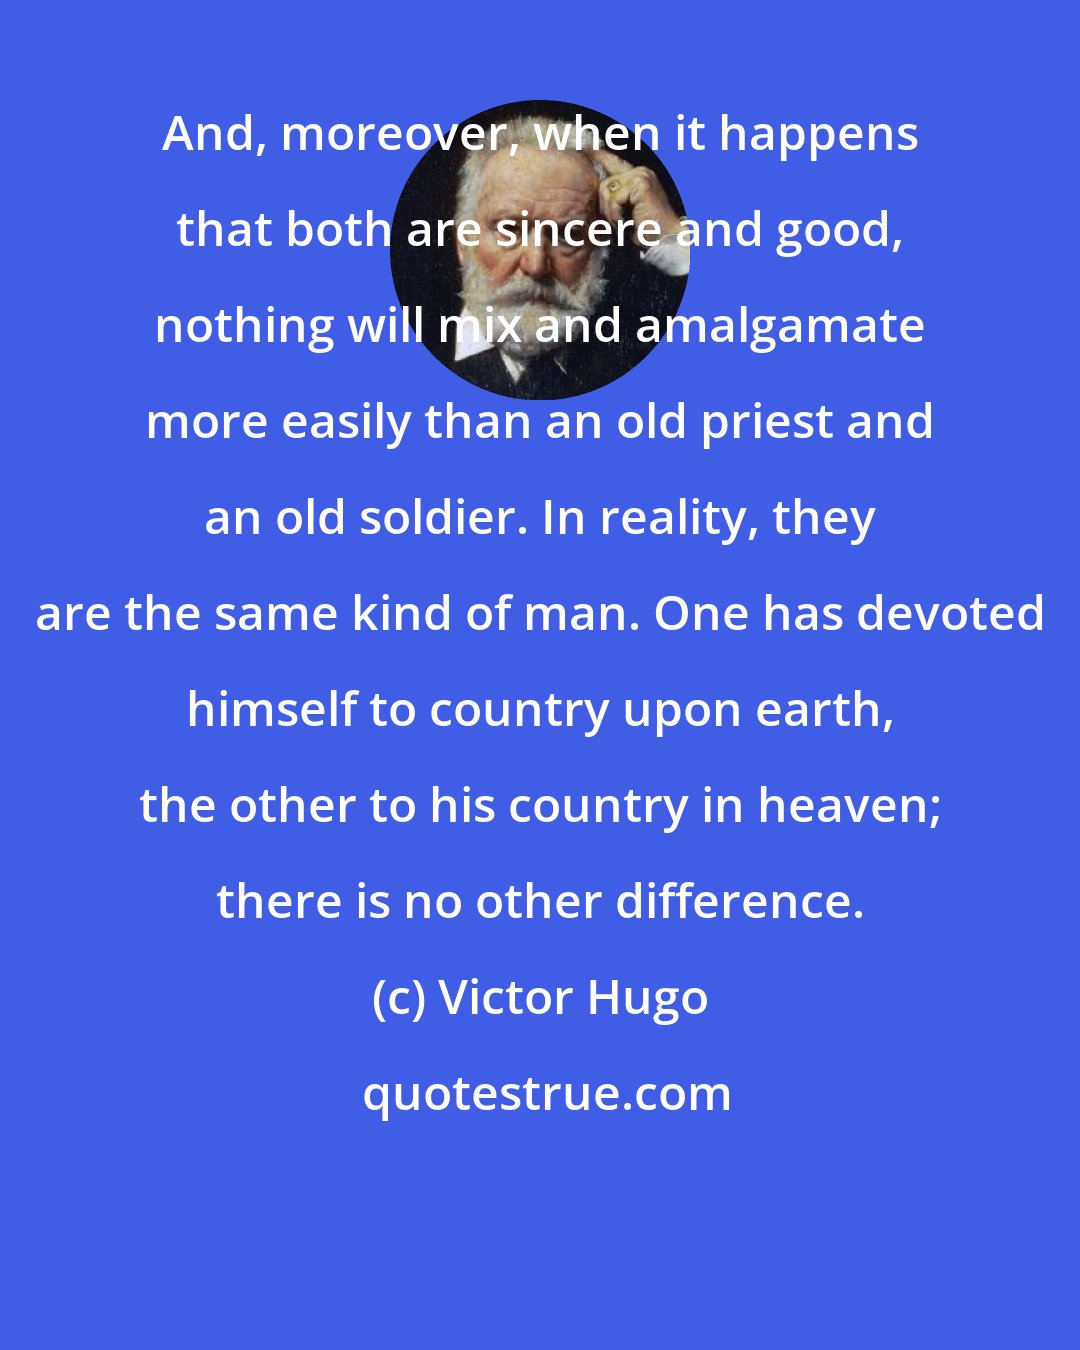 Victor Hugo: And, moreover, when it happens that both are sincere and good, nothing will mix and amalgamate more easily than an old priest and an old soldier. In reality, they are the same kind of man. One has devoted himself to country upon earth, the other to his country in heaven; there is no other difference.